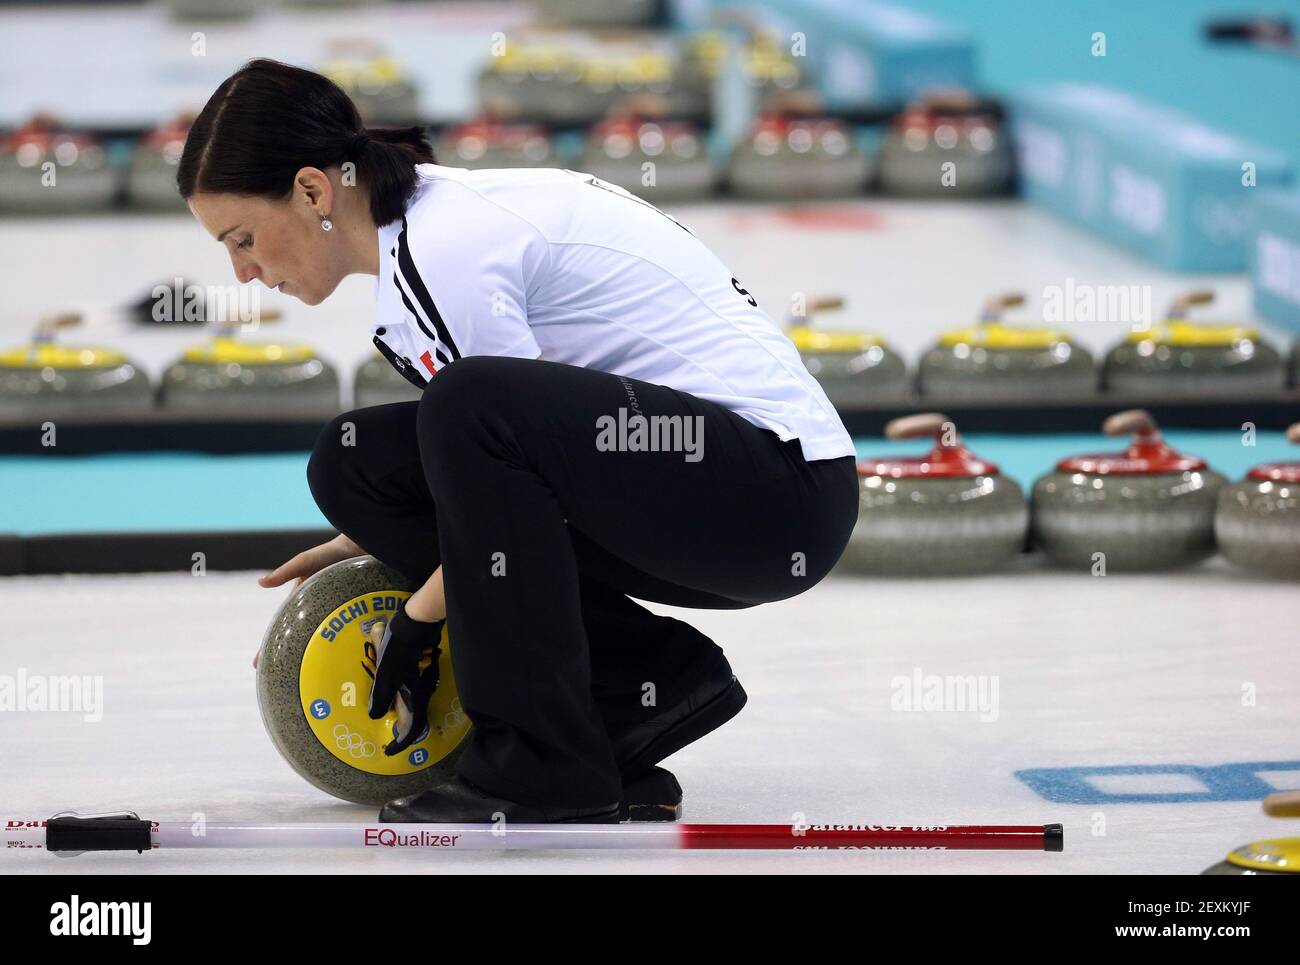 Switzerland's Carmen Kueng prepares a rock for a throw during women's curling semifinals at the Ice Cube Curling Center during the Winter Olympics in Sochi, Russia, Wednesday, Feb. 19, 2014. (Photo by Brian Cassella/Chicago Tribune/MCT/Sipa USA) Stock Photo